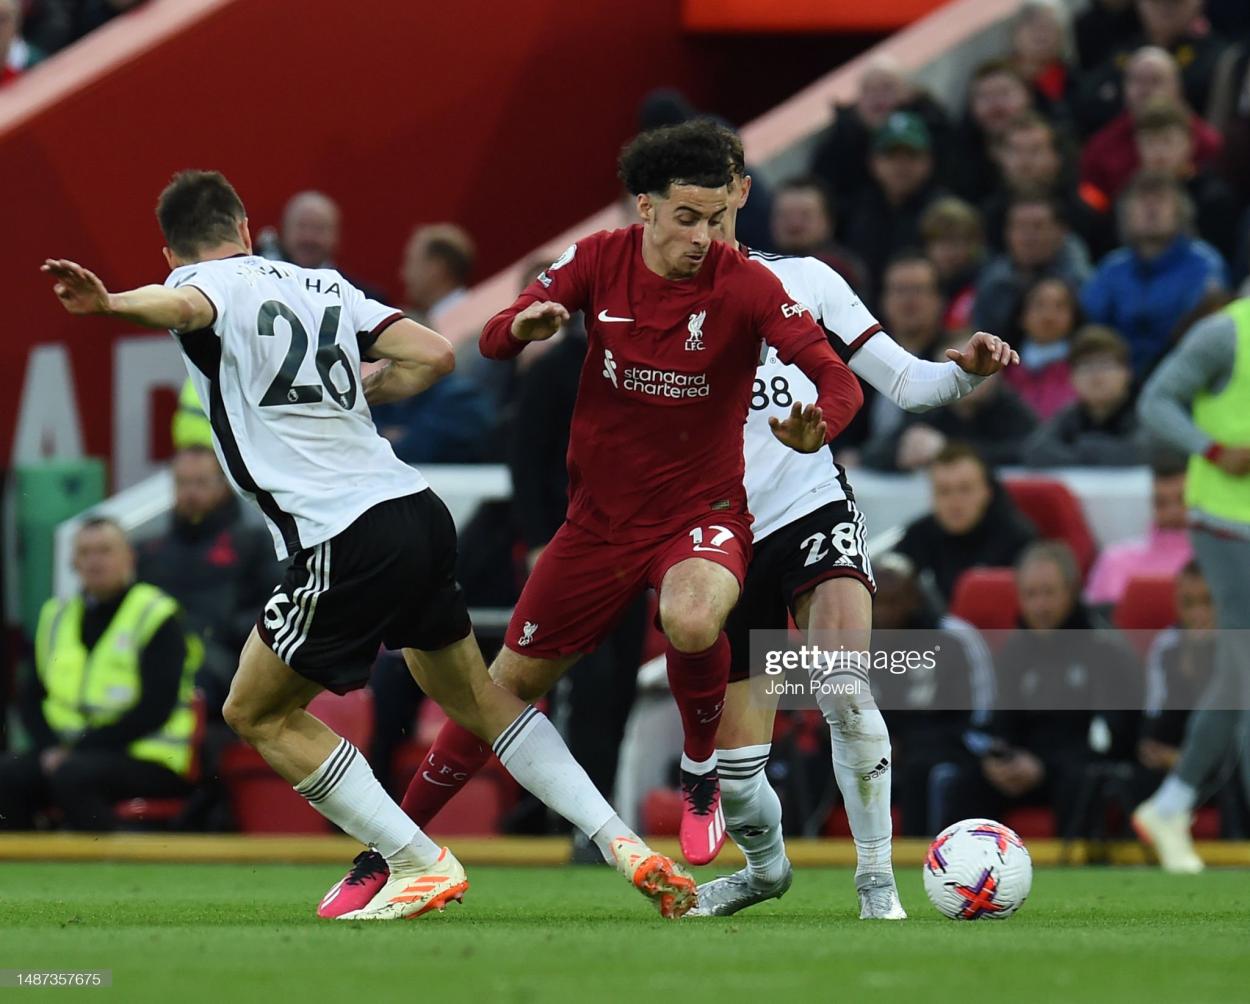 (Photo by John Powell/Liverpool FC via Getty Images